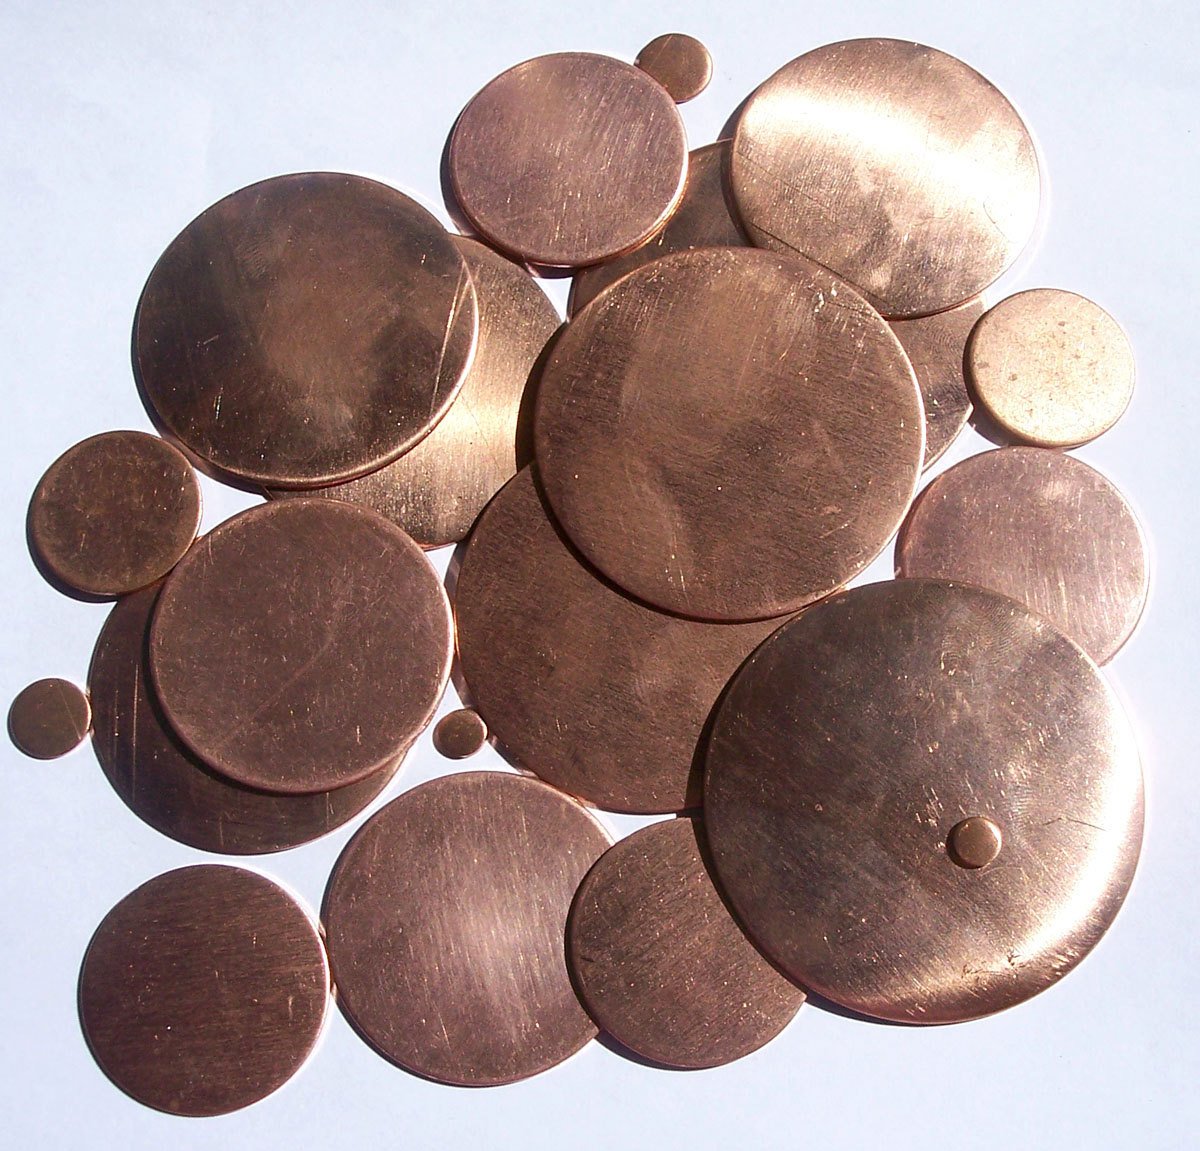 20mm Blank Disc 20G Cutout for Enameling Stamping Texturing Blanks - Metalworking Supply - 6 Pieces